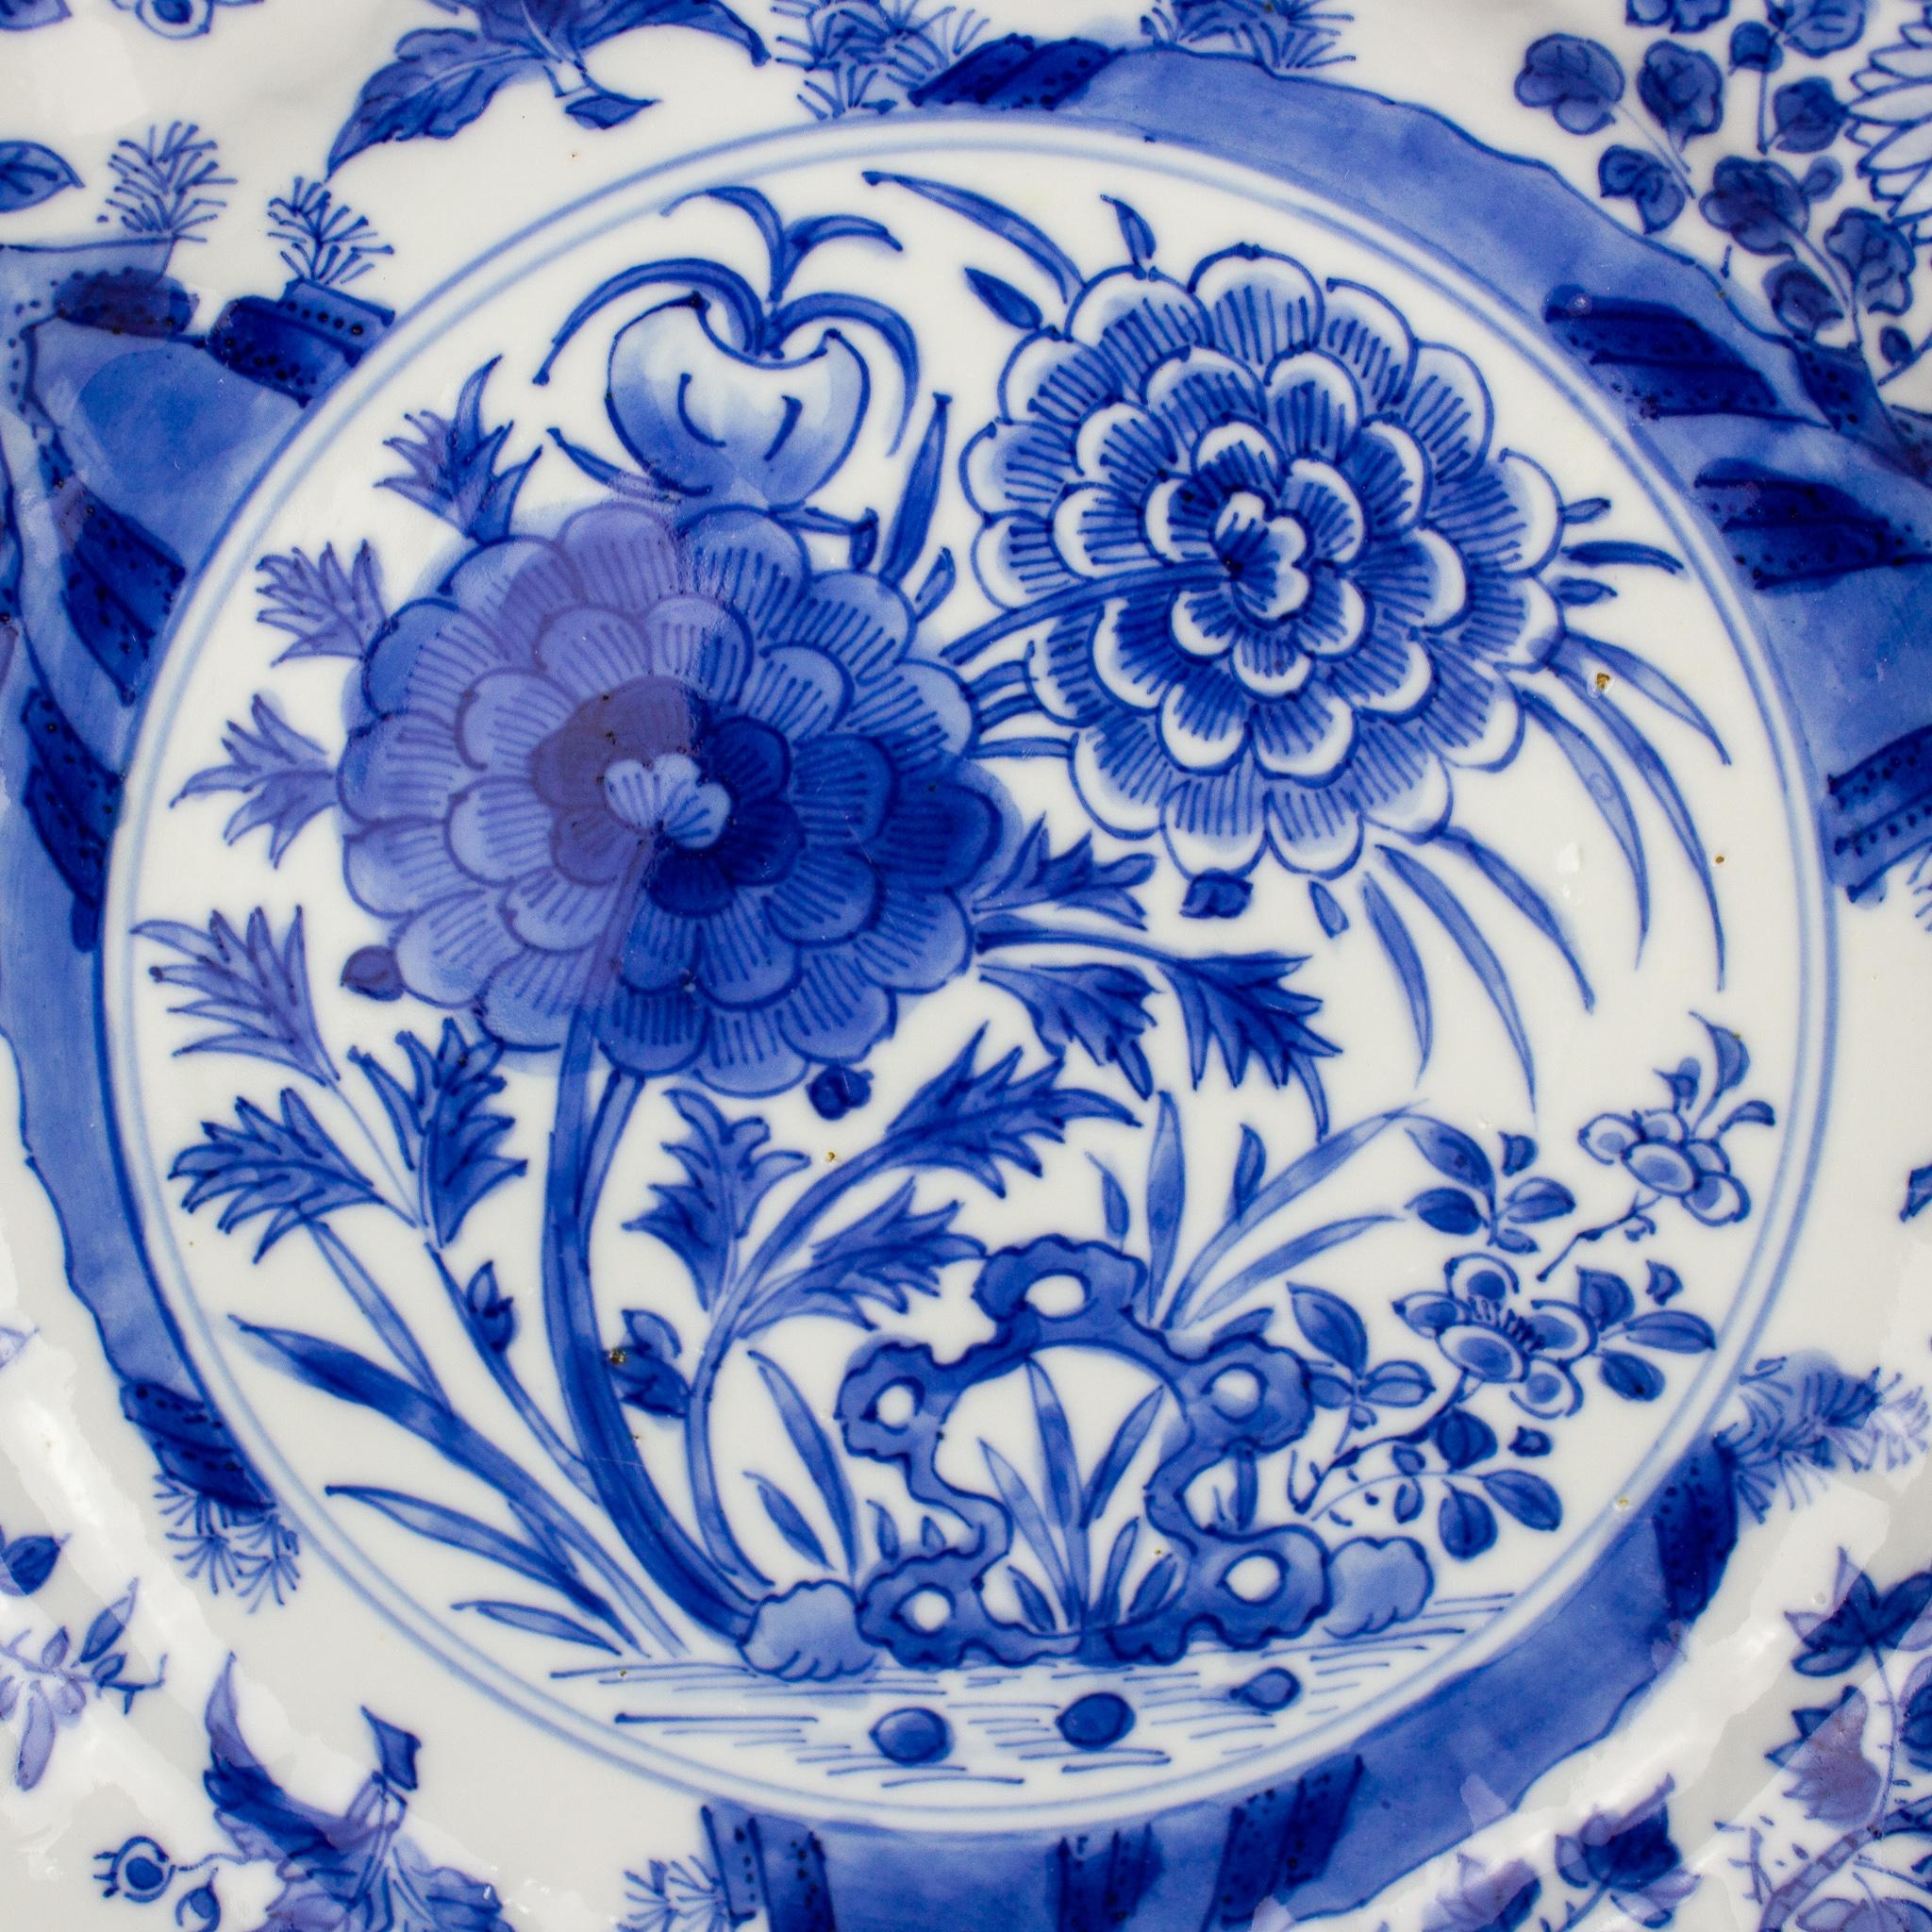 A small Chinese porcelain dish, East India Company, Qing Dynasty (1644-1912), Kangxi Period (1662-1722). Decorated with underglaze blue depicting floral and vegetal motifs in the center and rim. In the back we can see some vegetal decoration in the